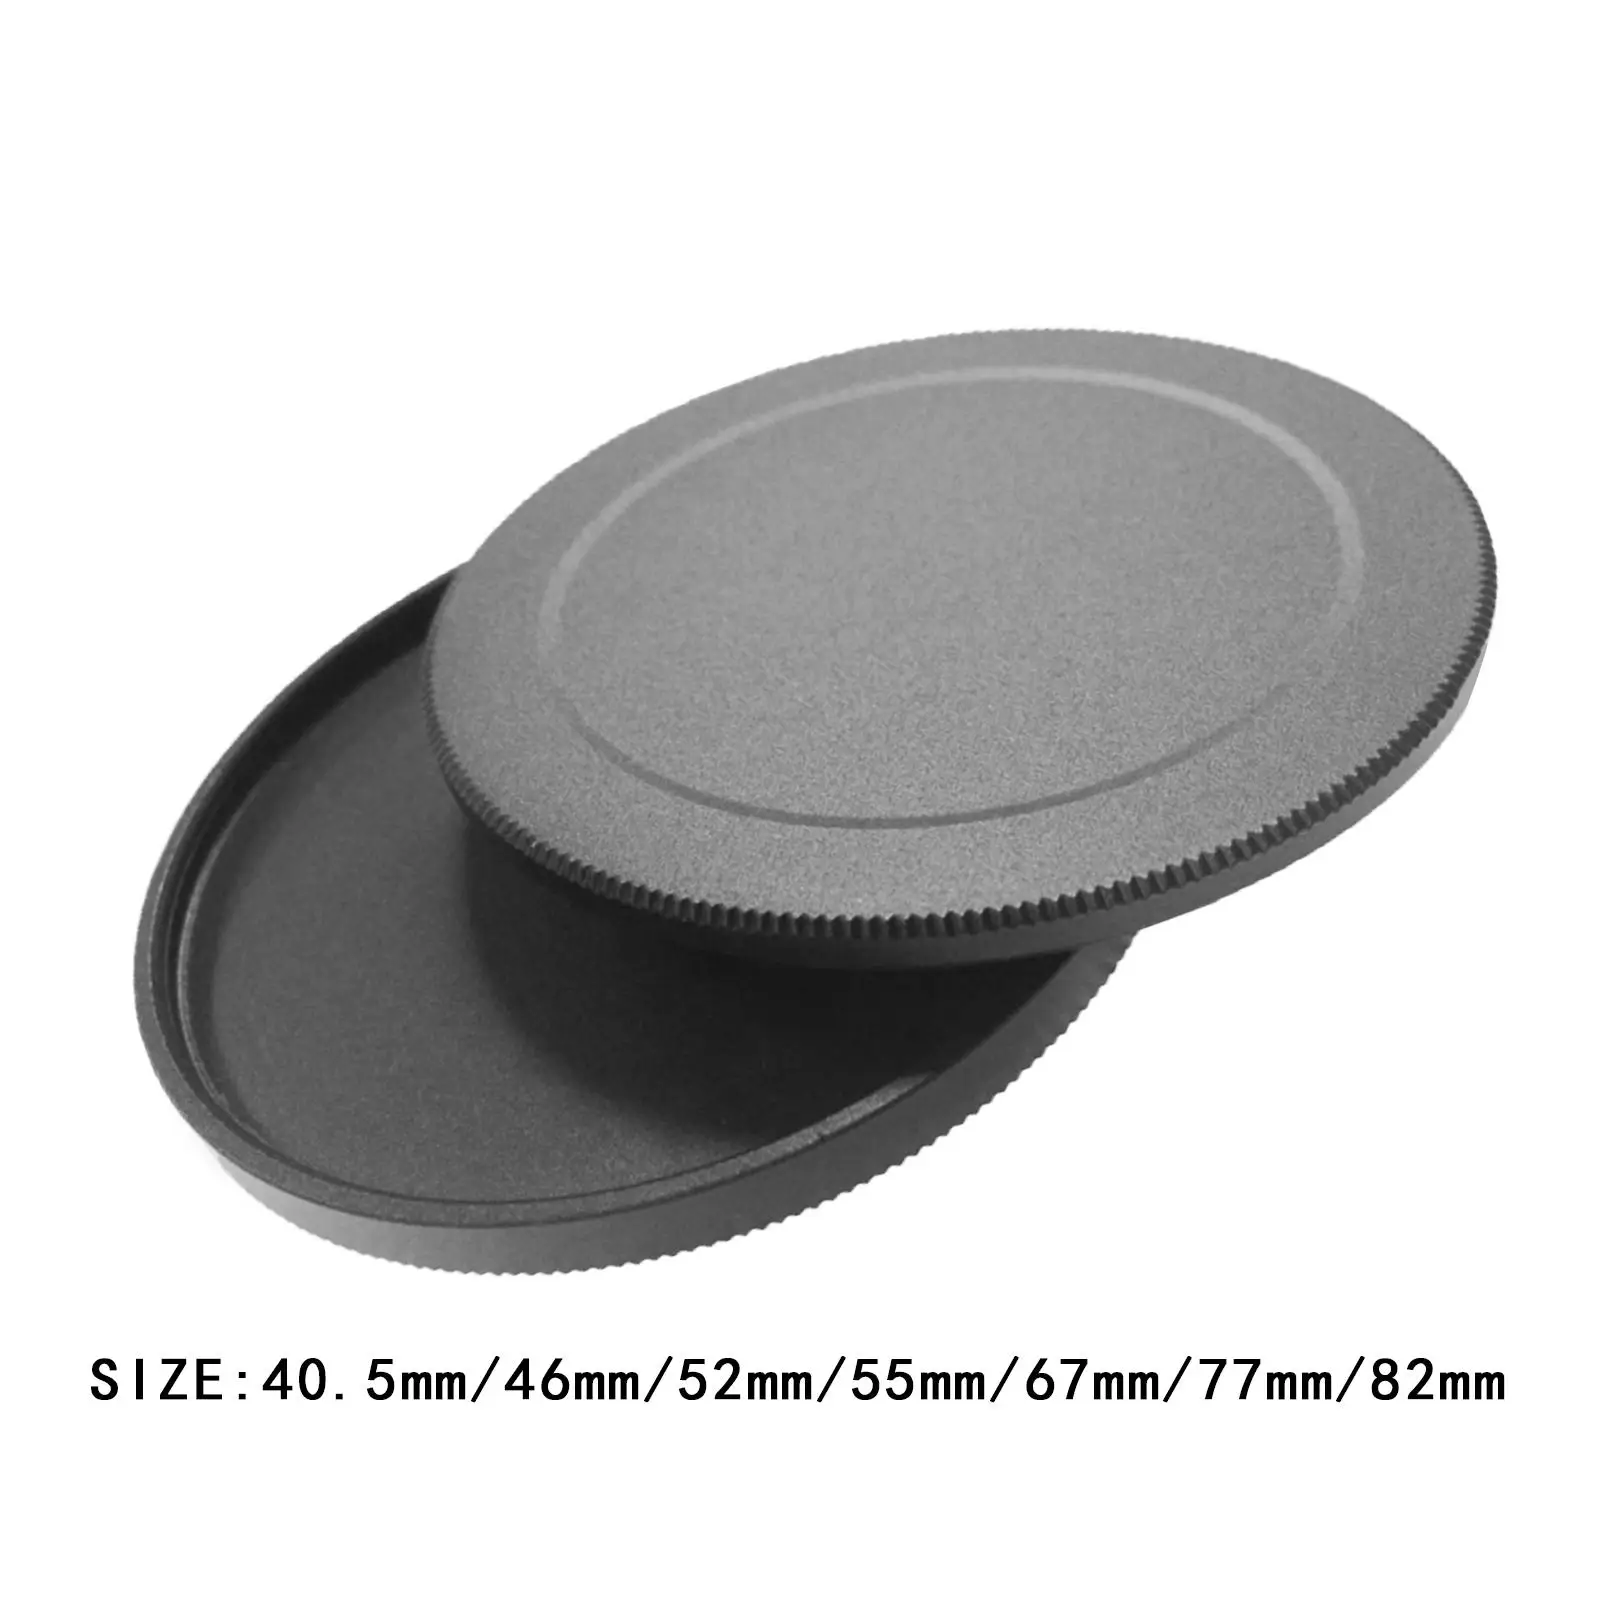 2 Pieces Metal Screw in Lens Filter Stack Caps Filters Cover Front Rear Case for Cpl Fader Filters Metal Box Storage Caps